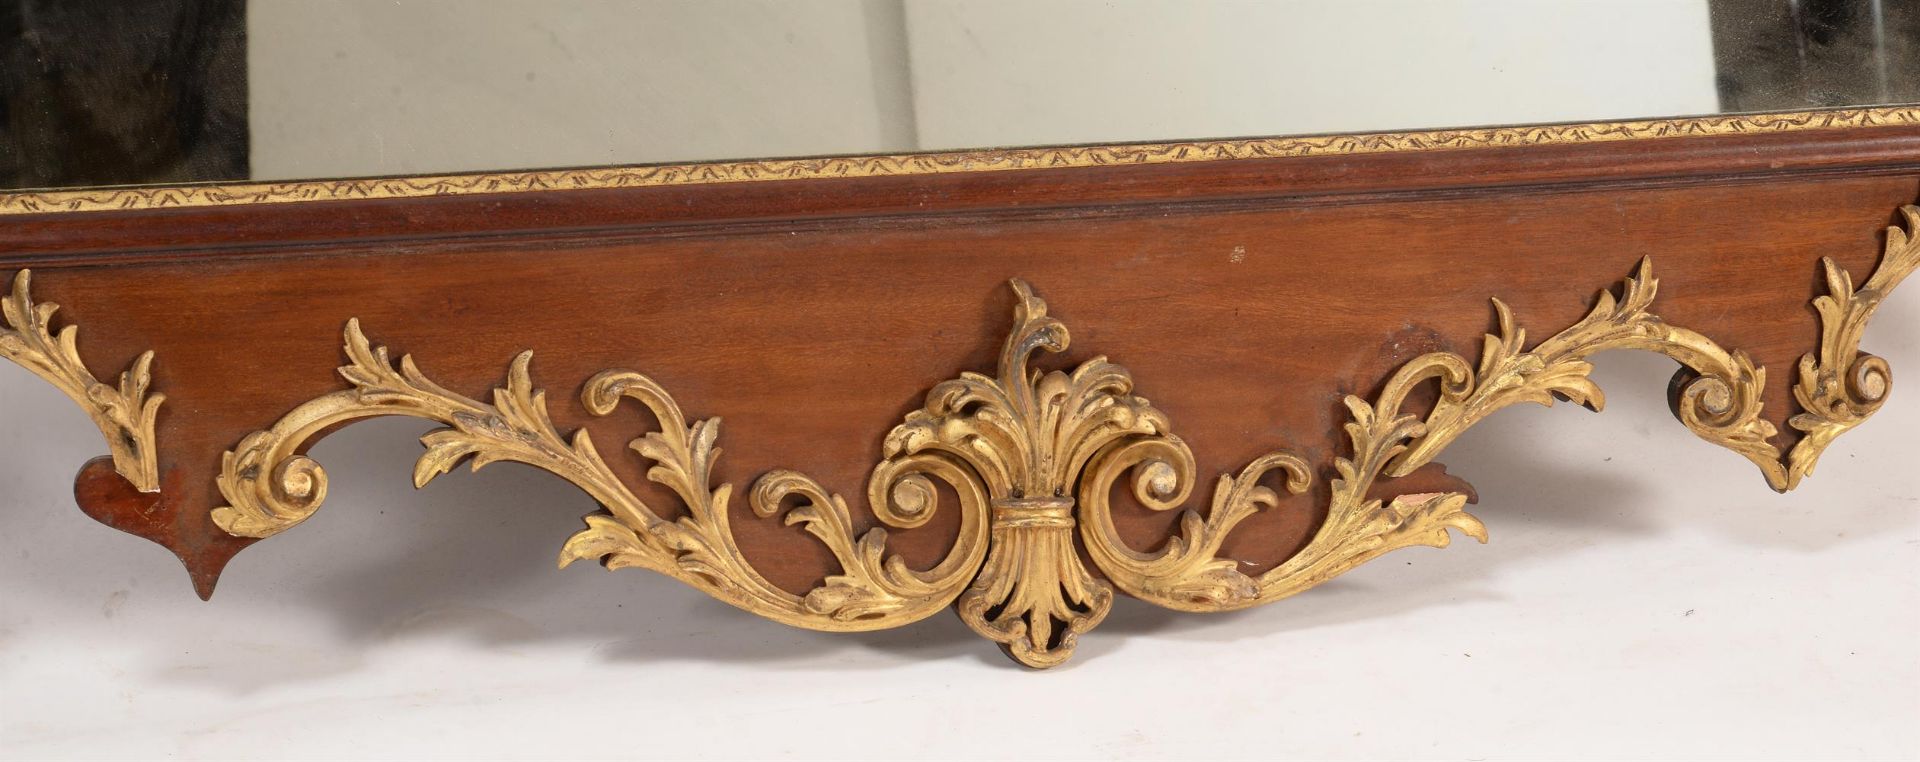 A MAHOGANY AND GILTWOOD OVERMANTEL WALL MIRROR, SECOND HALF 19TH CENTURY - Image 5 of 6